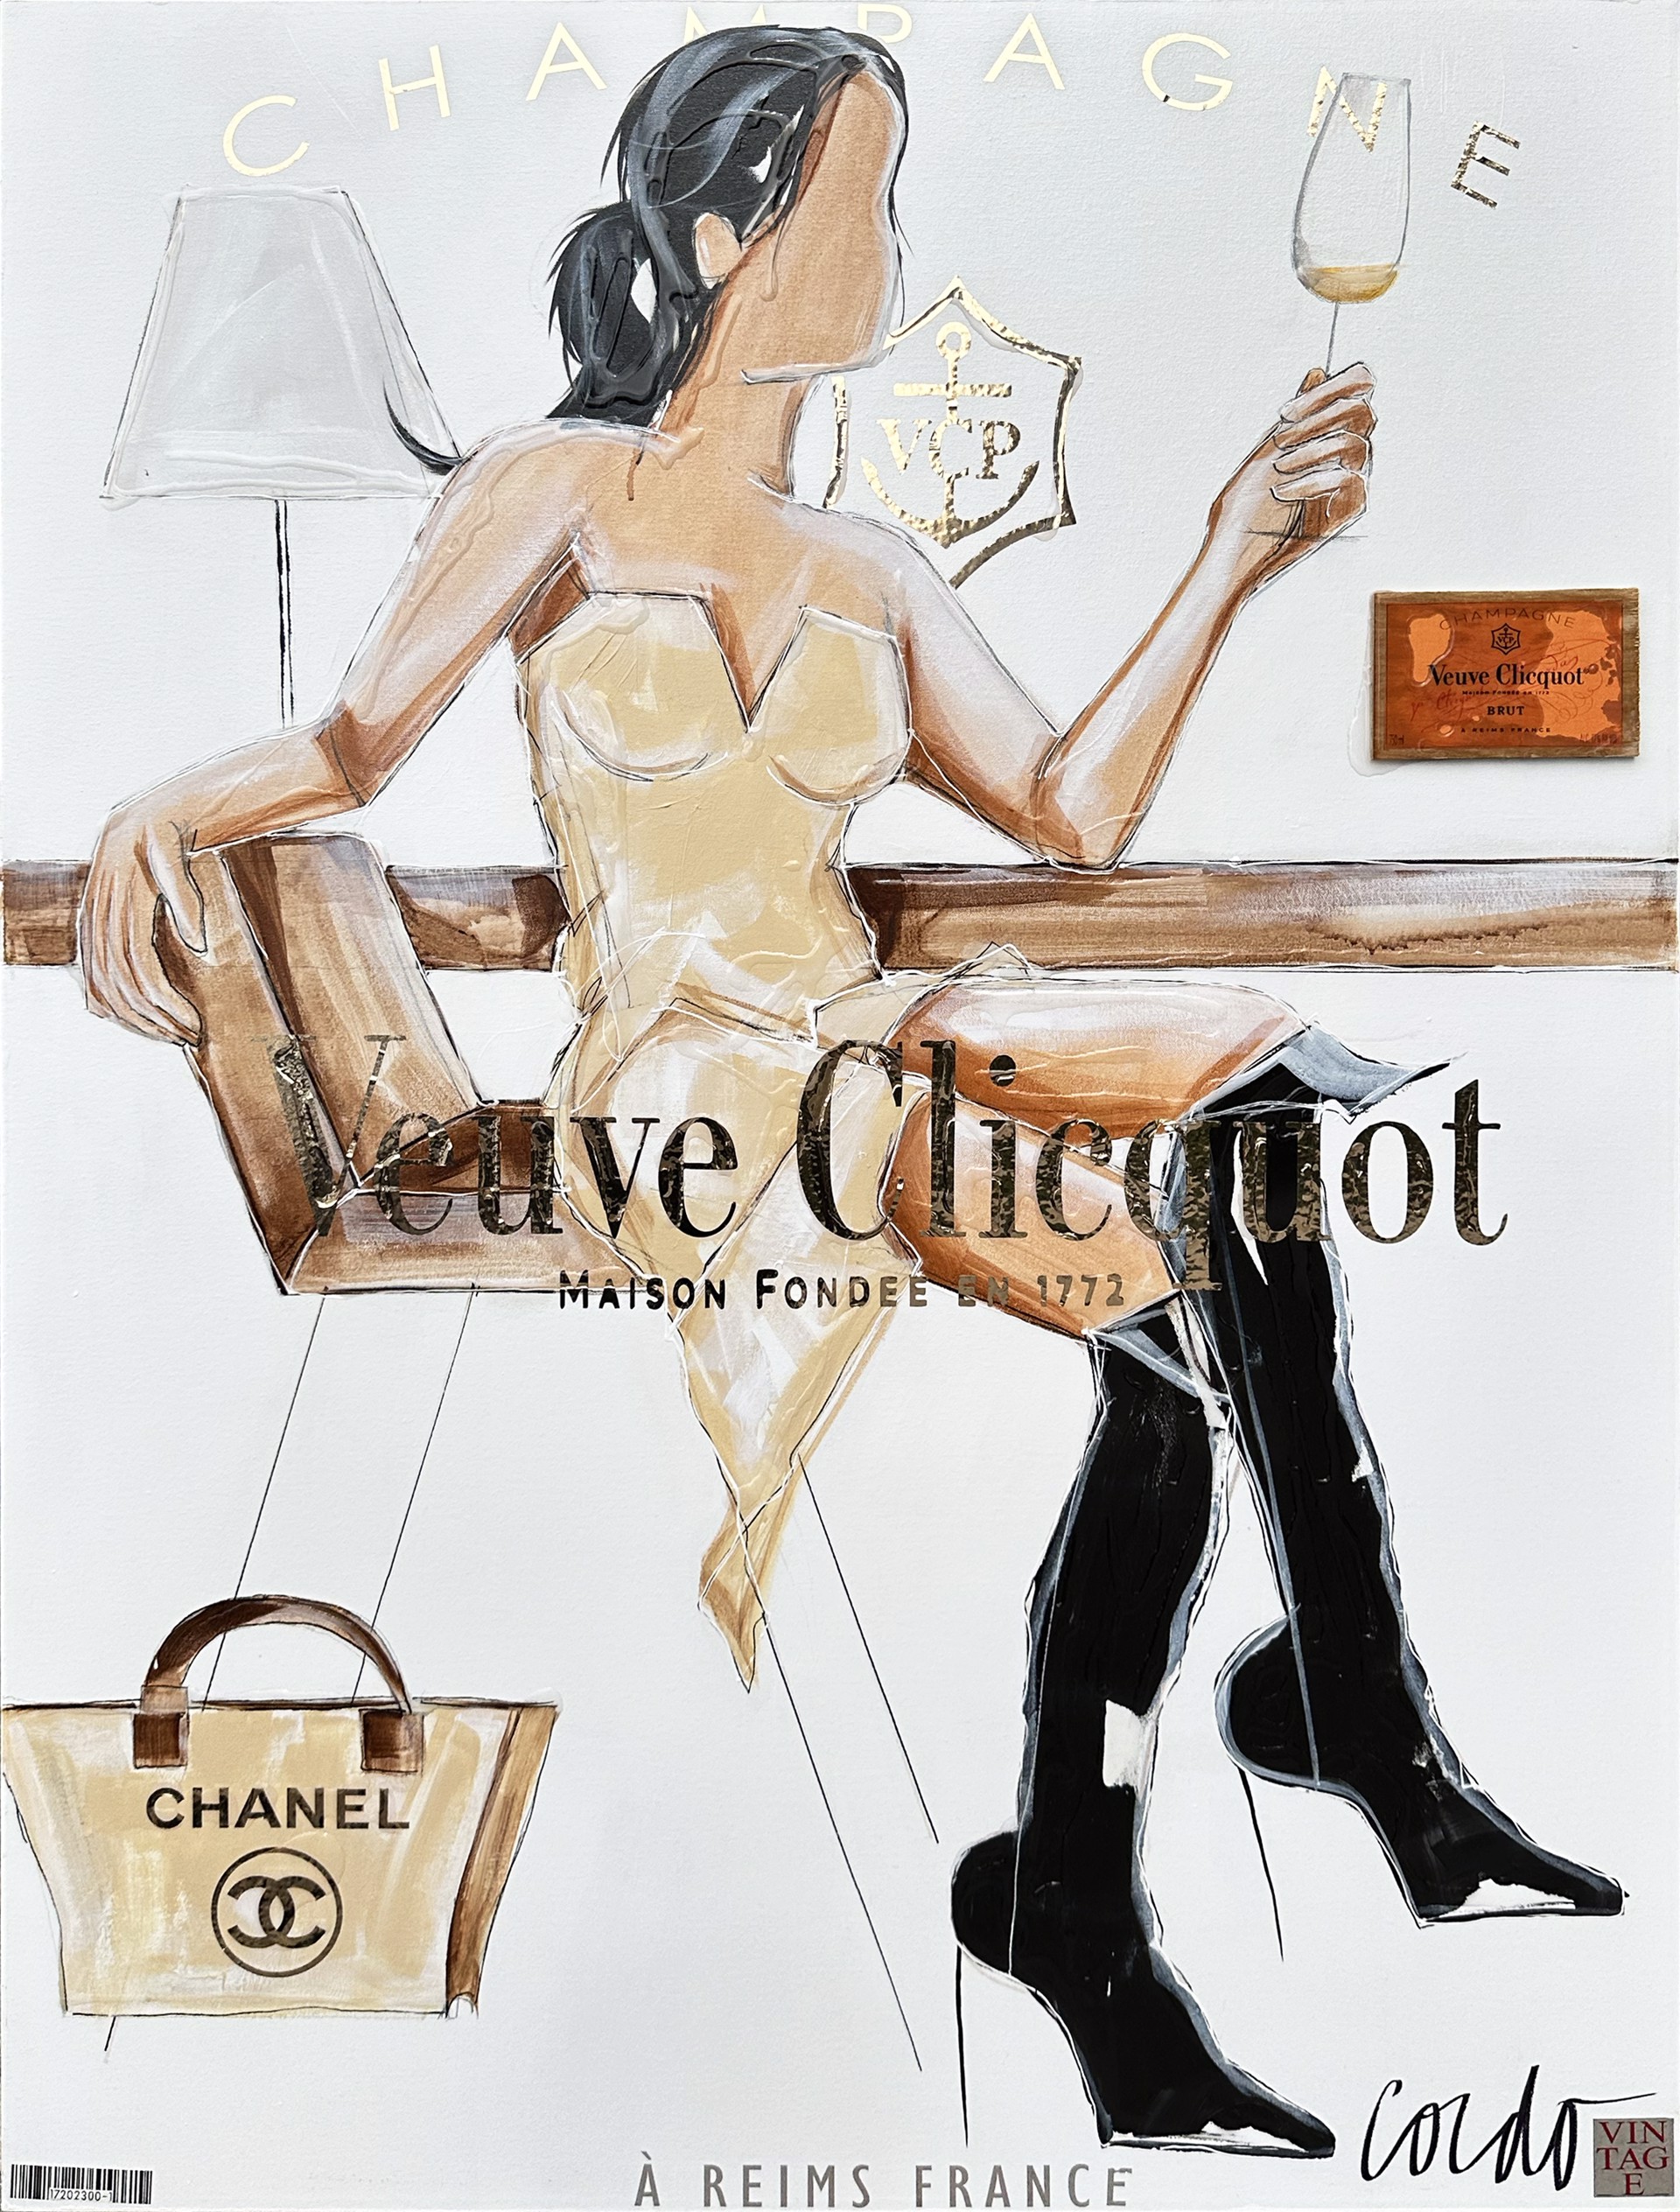 LOUNGE WITH CHAMPAGNE 17H06 by Vincent Cordo